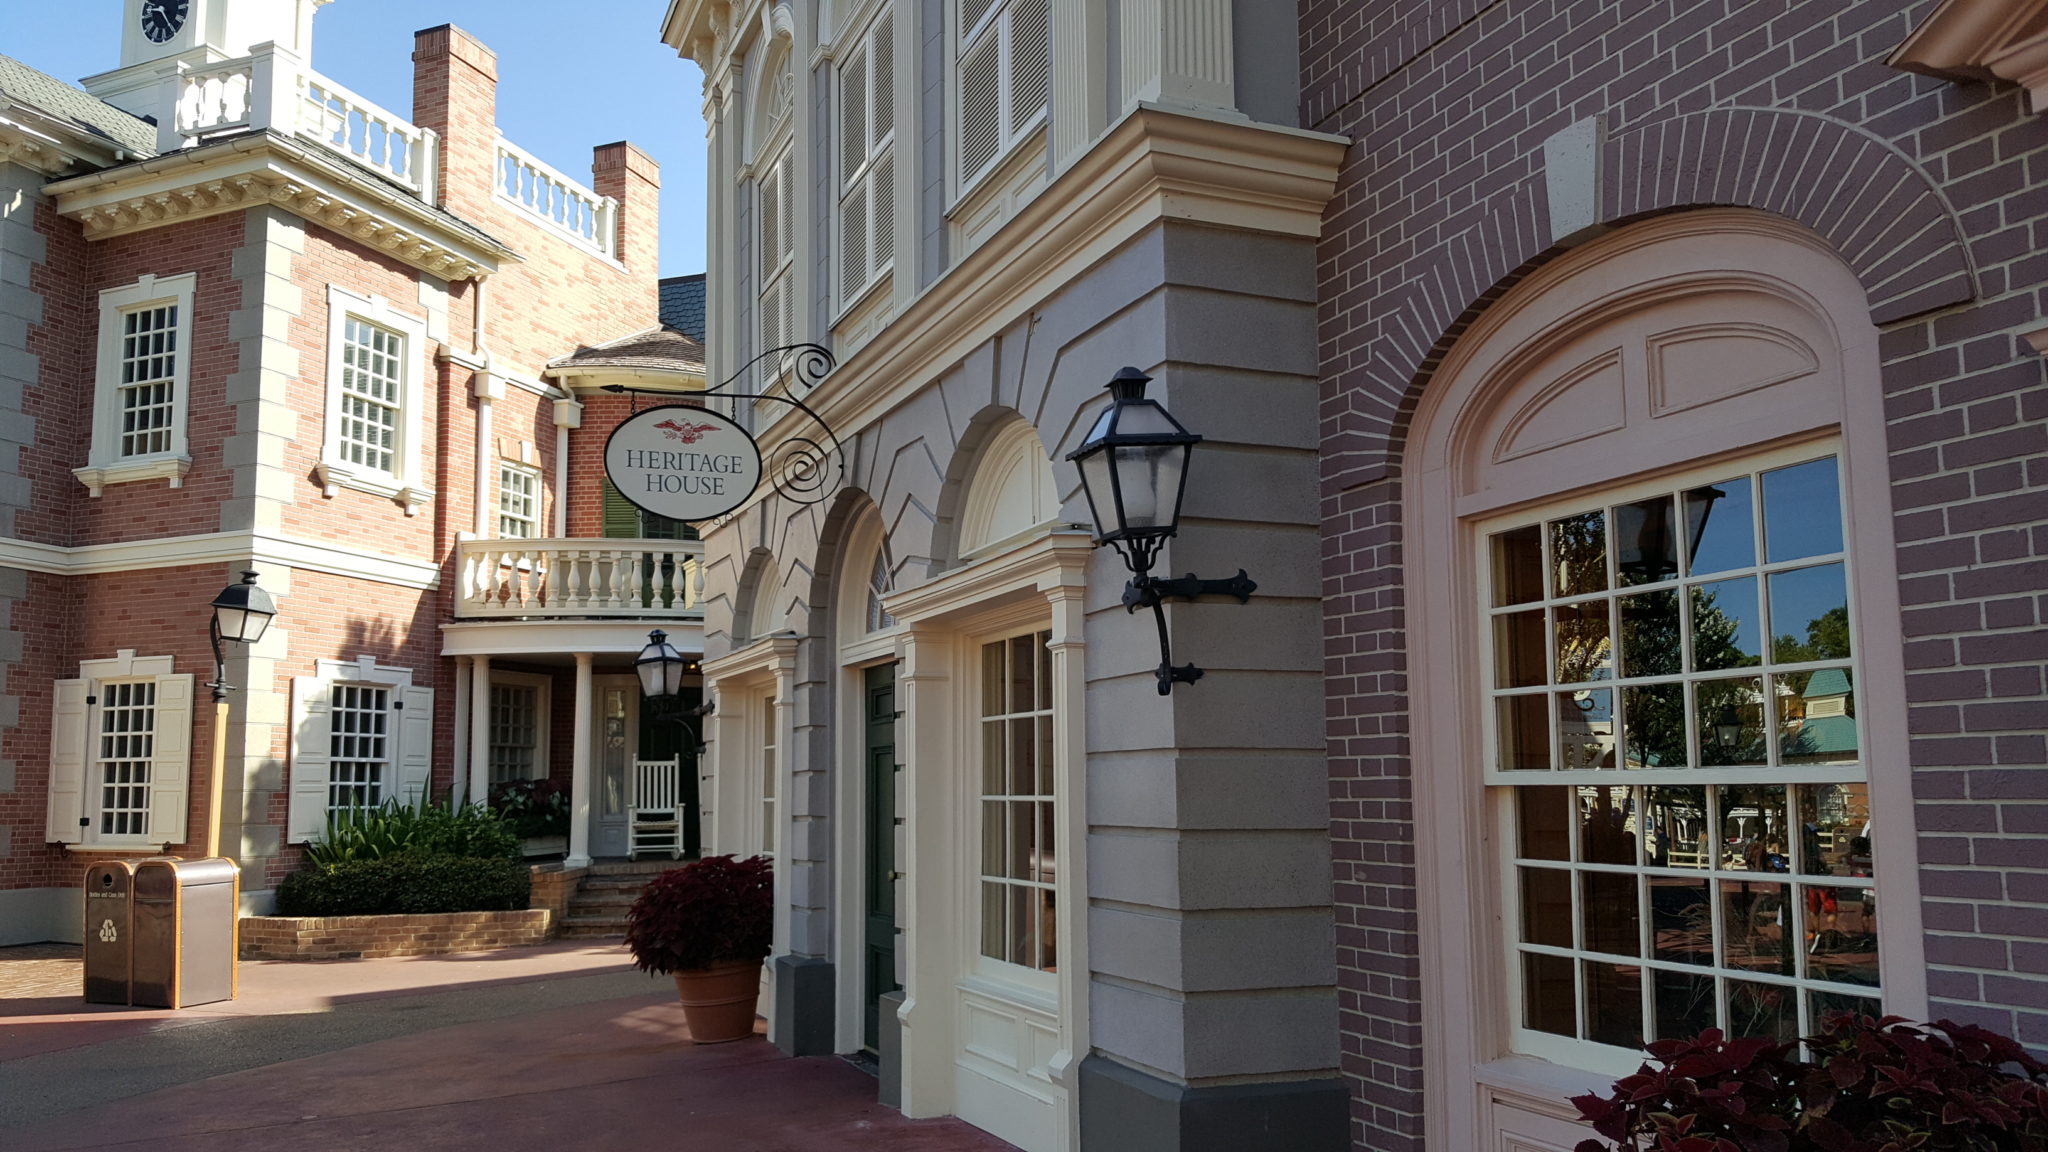 Belle Meet & Greet at Heritage House in the Magic Kingdom for a limited time